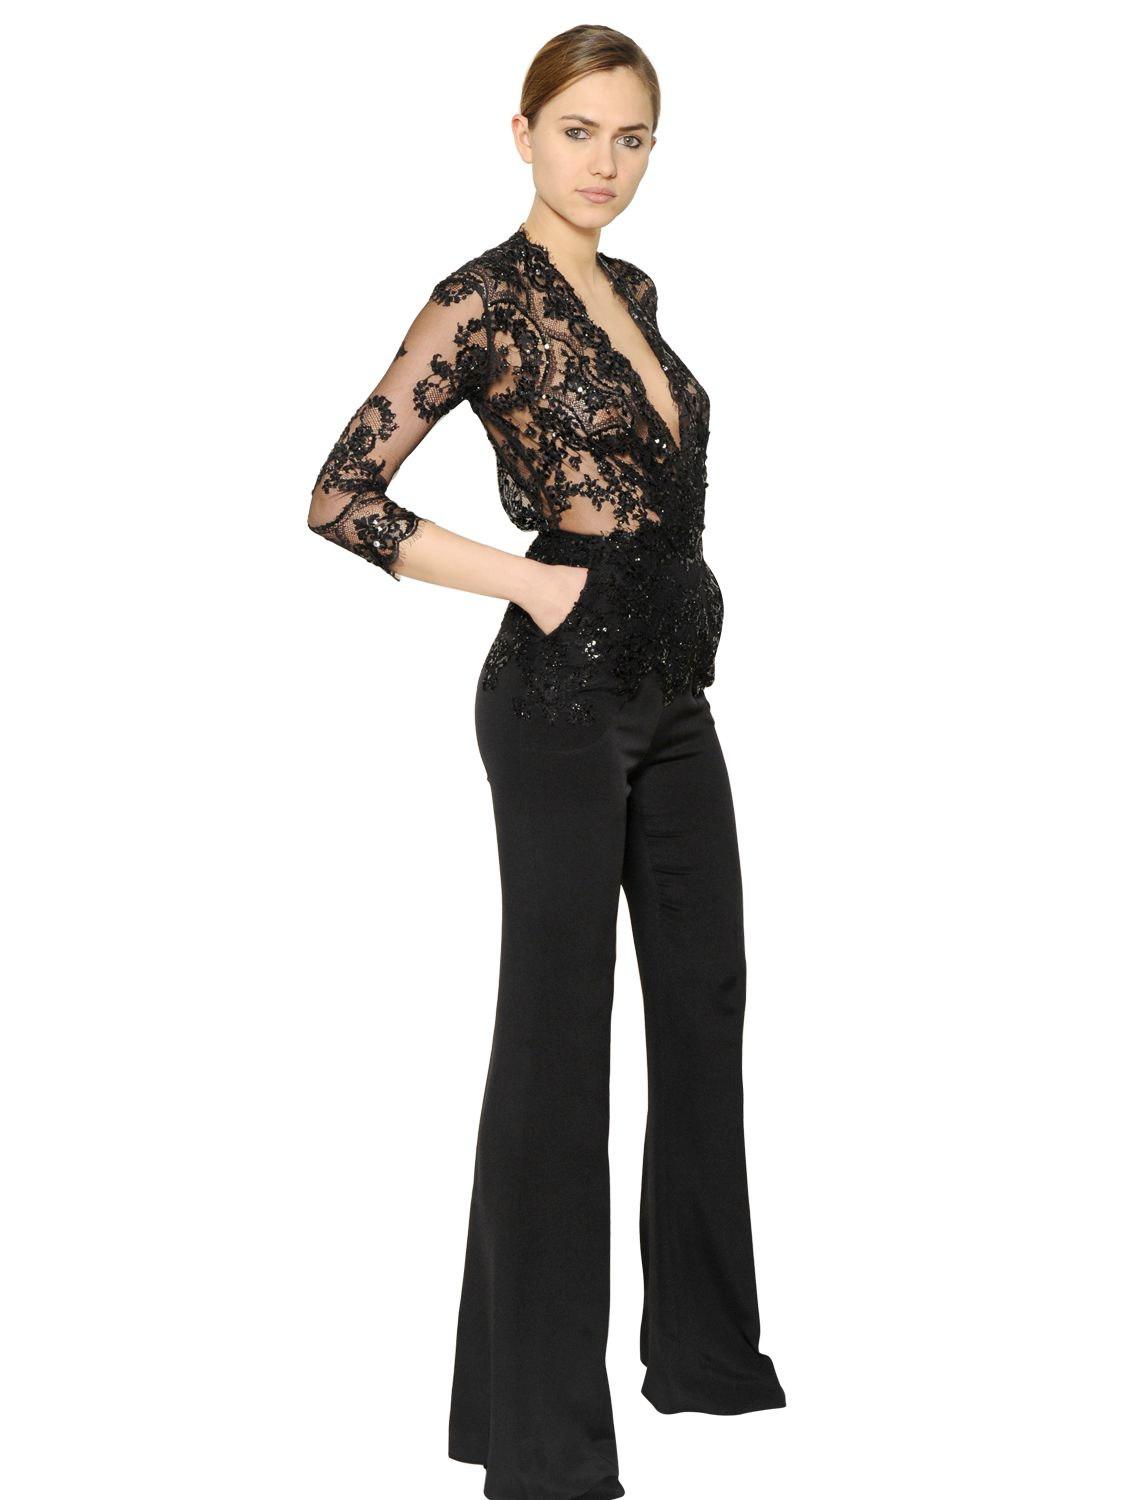 Zuhair Murad Embellished Lace & Crepe Jumpsuit in Black - Lyst